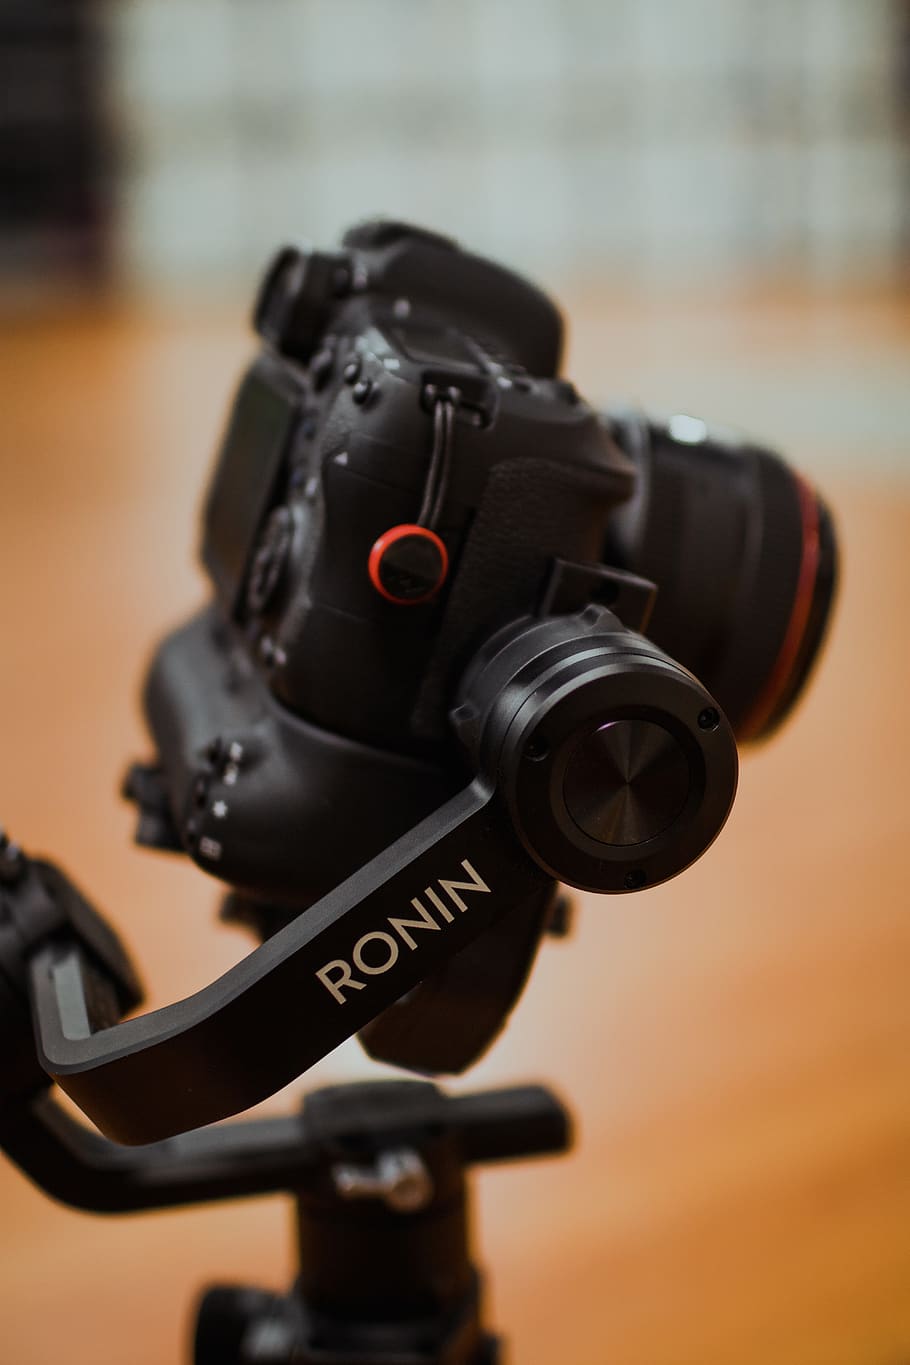 black Ronin gimbal, technology, photography themes, focus on foreground, HD wallpaper